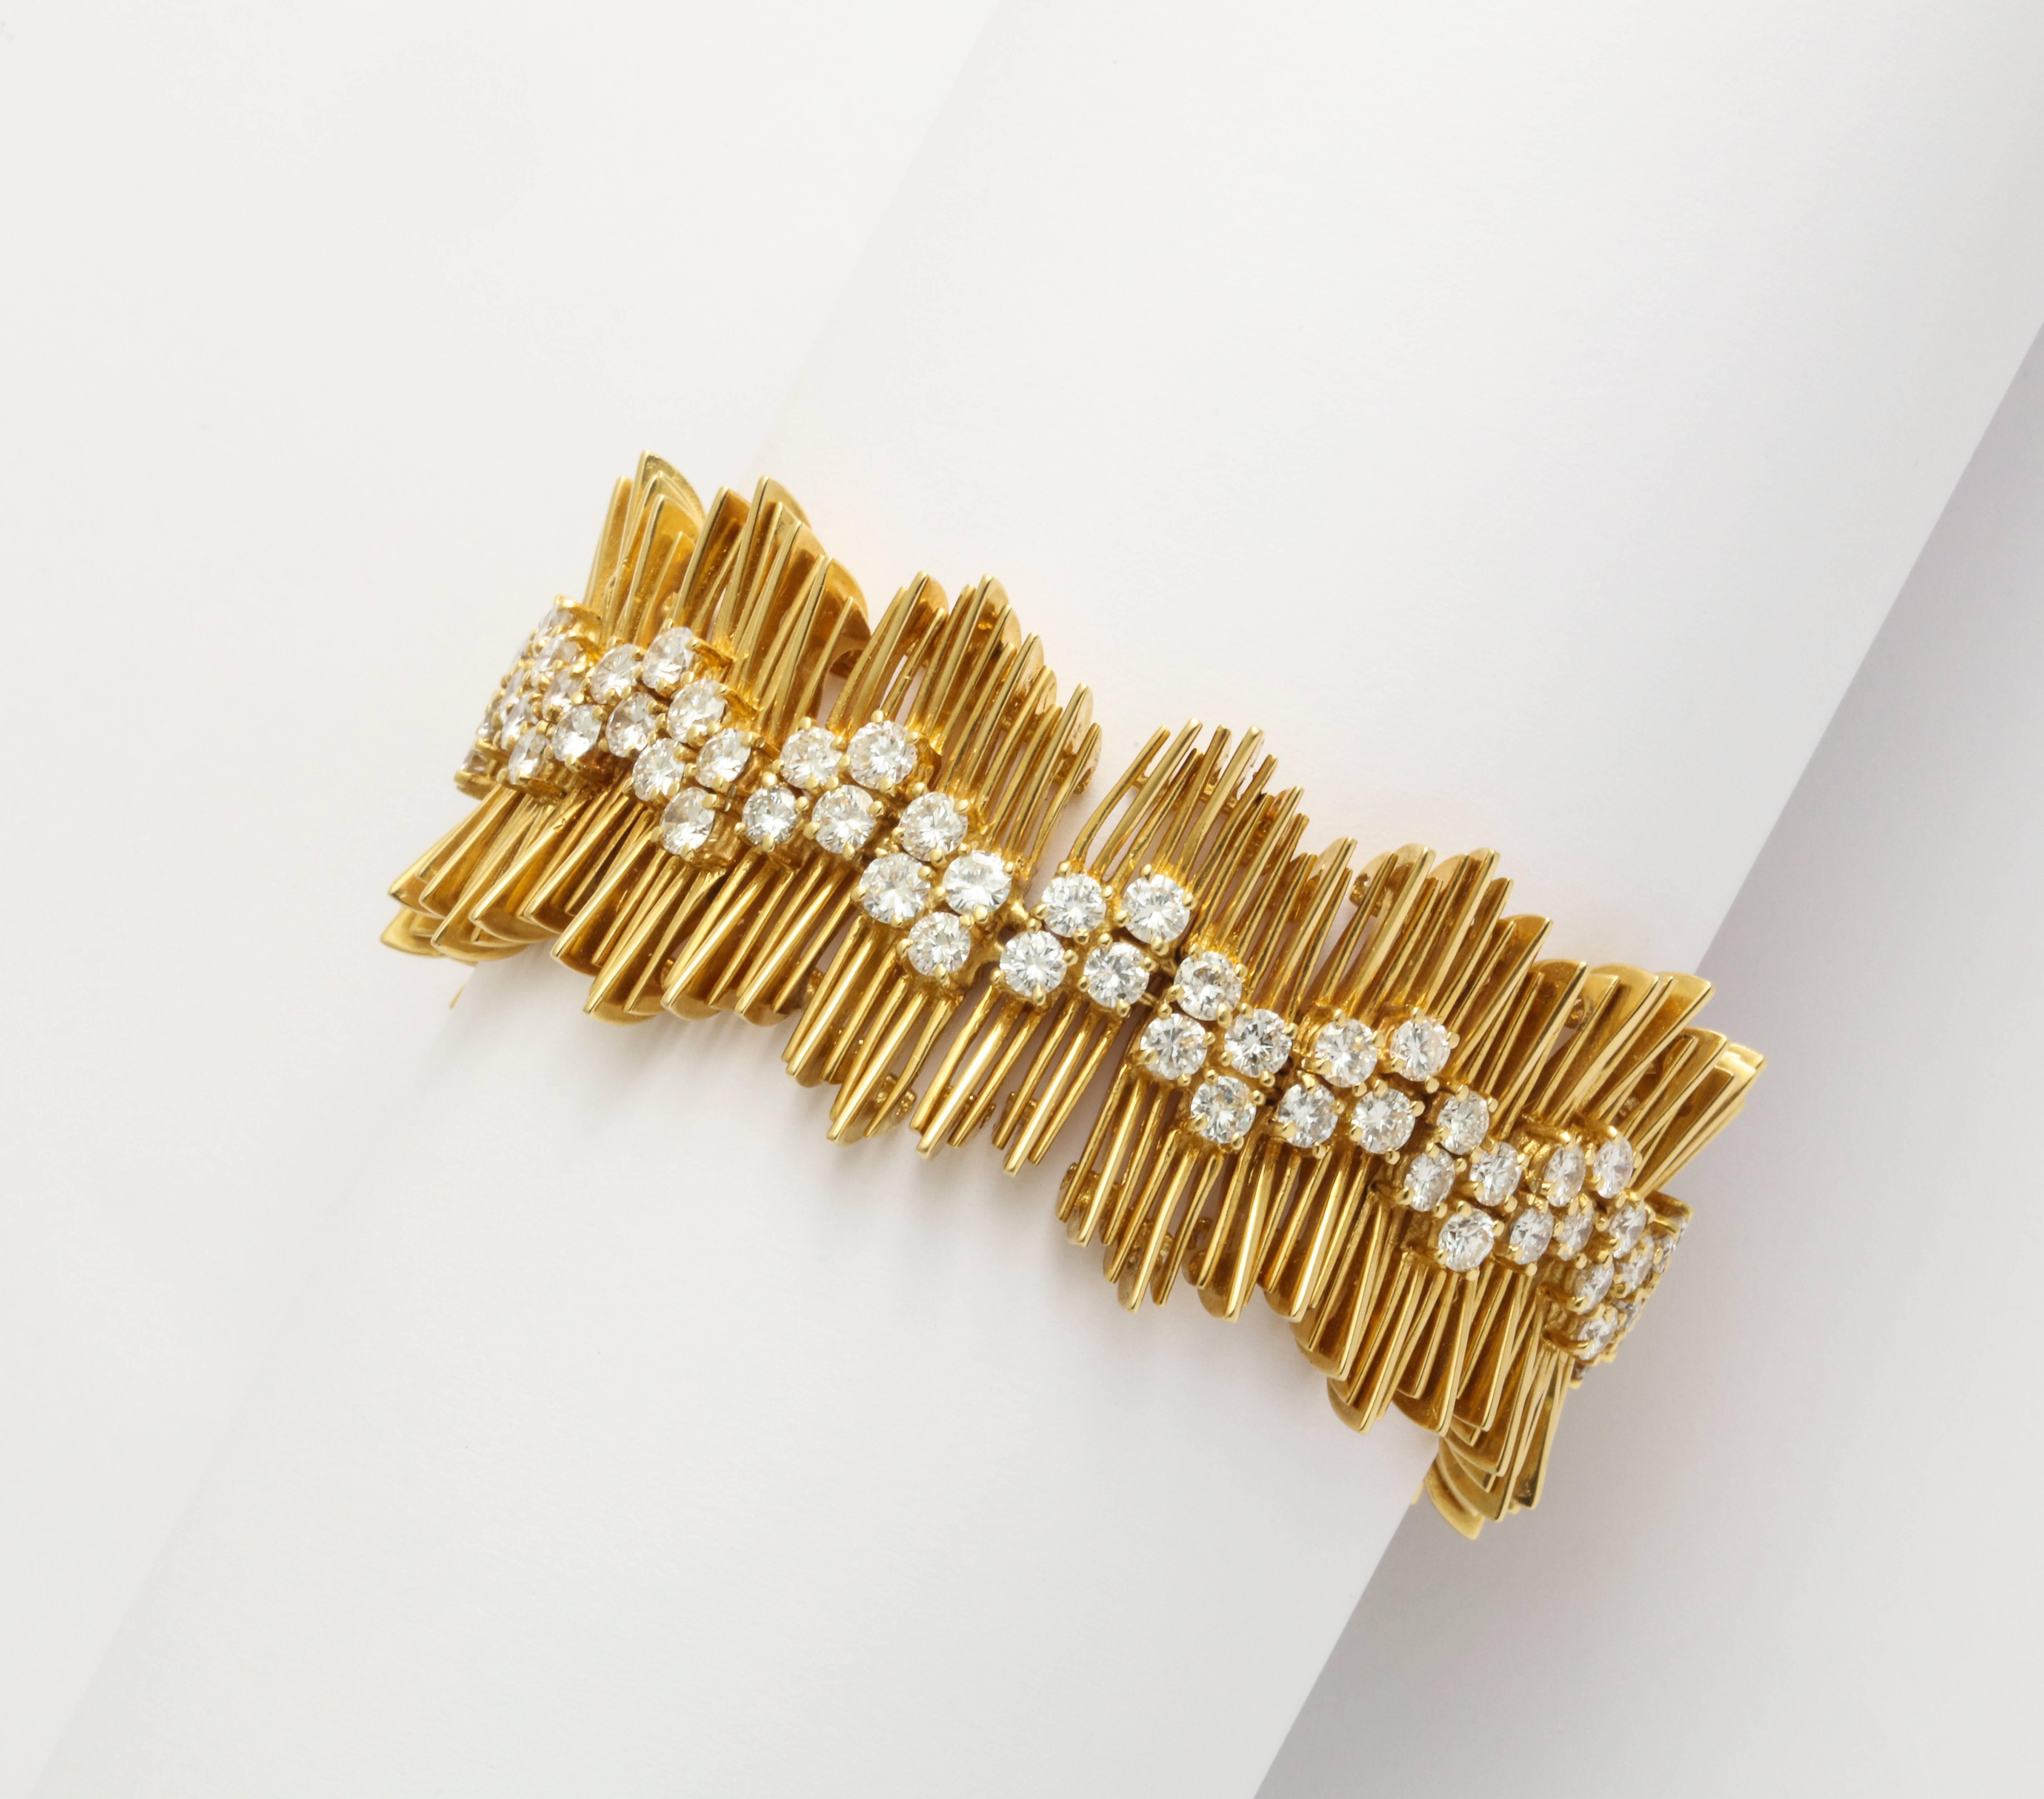 A bracelet set in 18 karat yellow gold featuring round brilliant cut diamonds with a total weight of approximately 10.20 carats. The diamonds are of high quality, ranging from F-H in color, VS clarity. 6.5 in. in length. 